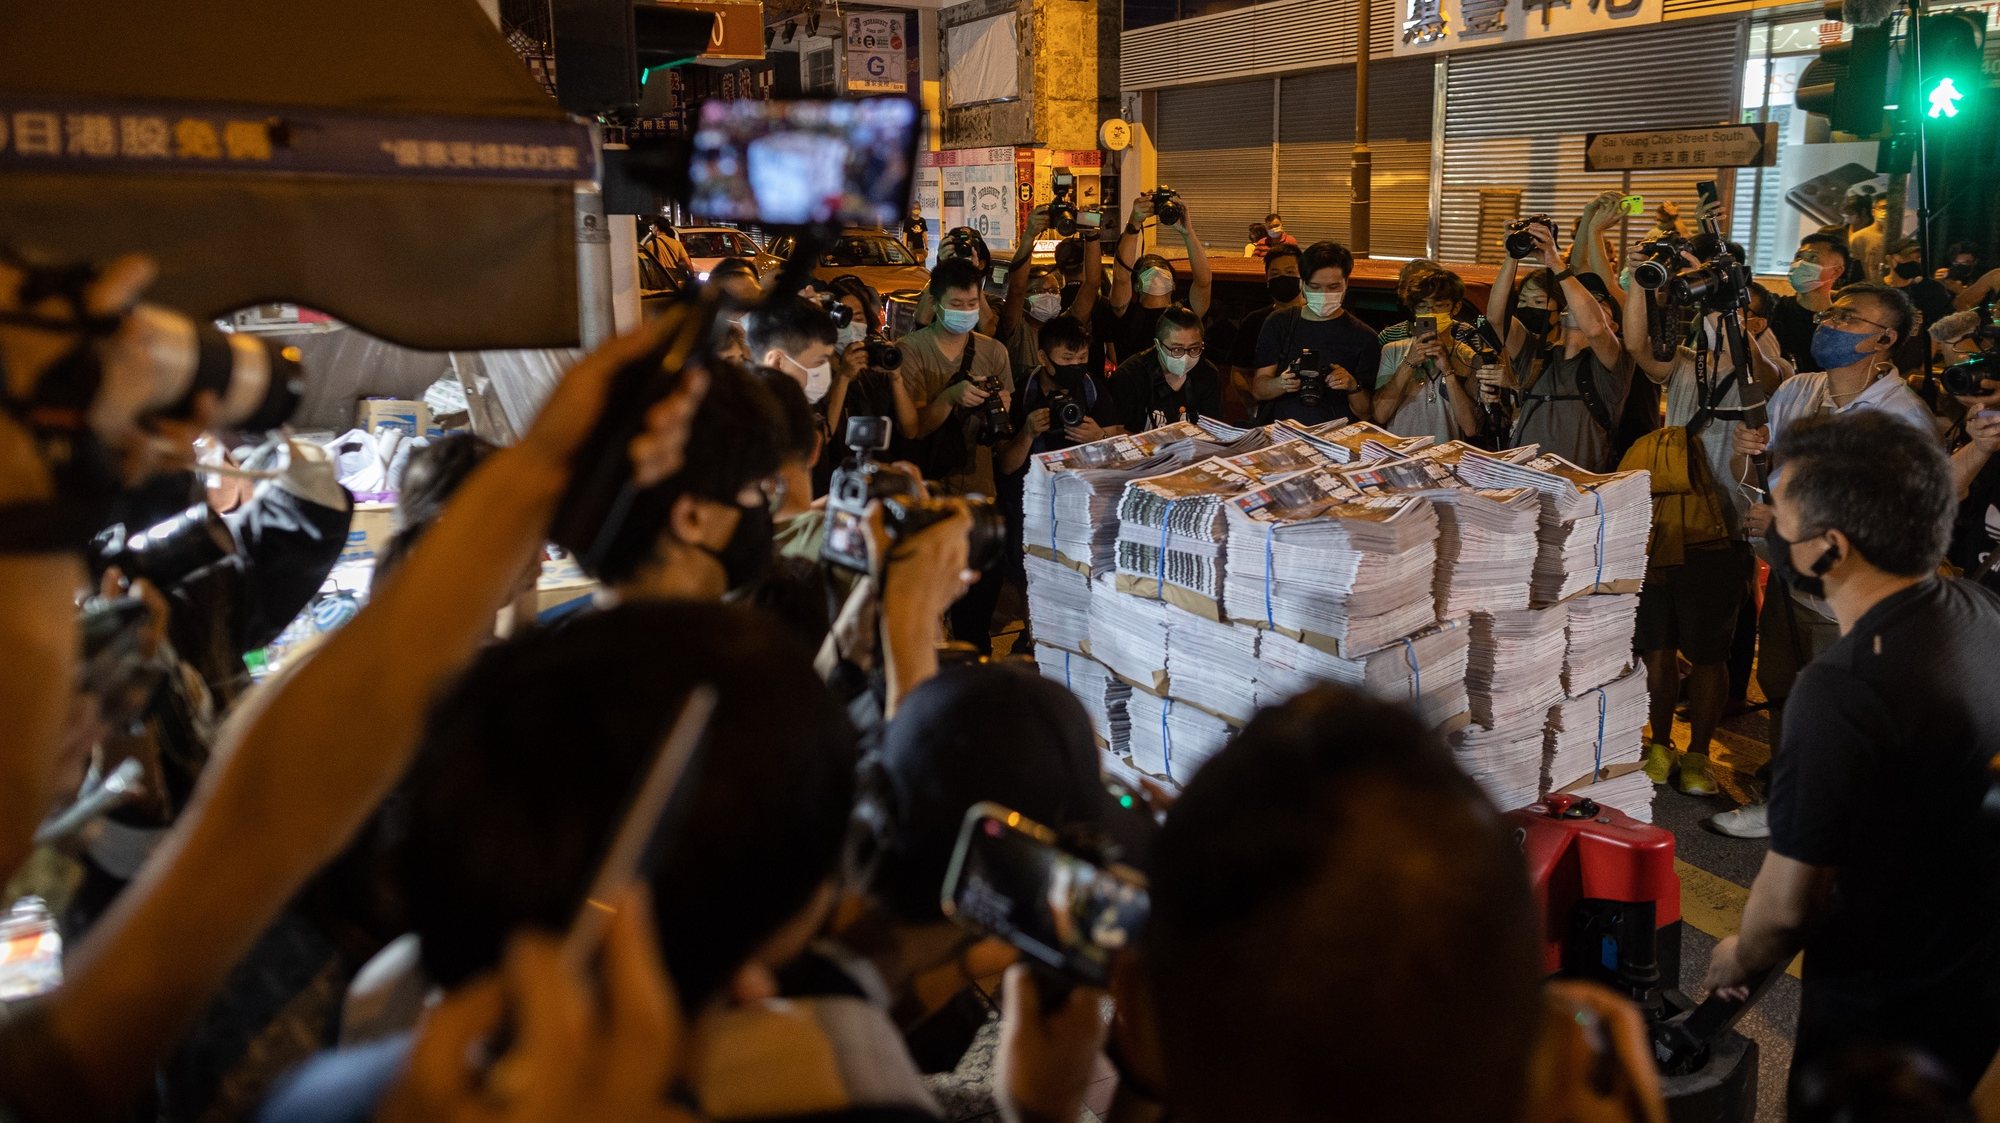 epa09296913 Supporters and members of the media surround a palette of Apple Dailyâ€™s final issue being delivered to a newsstand in the early hours to buy Apple Dailyâ€™s final issue in Mongkok district, Hong Kong, China, 24 June 2021. The last edition of Apple Daily rolled off the presses three days earlier than expected, after management took into consideration the safety of its staff and manpower concerns.  EPA/JEROME FAVRE